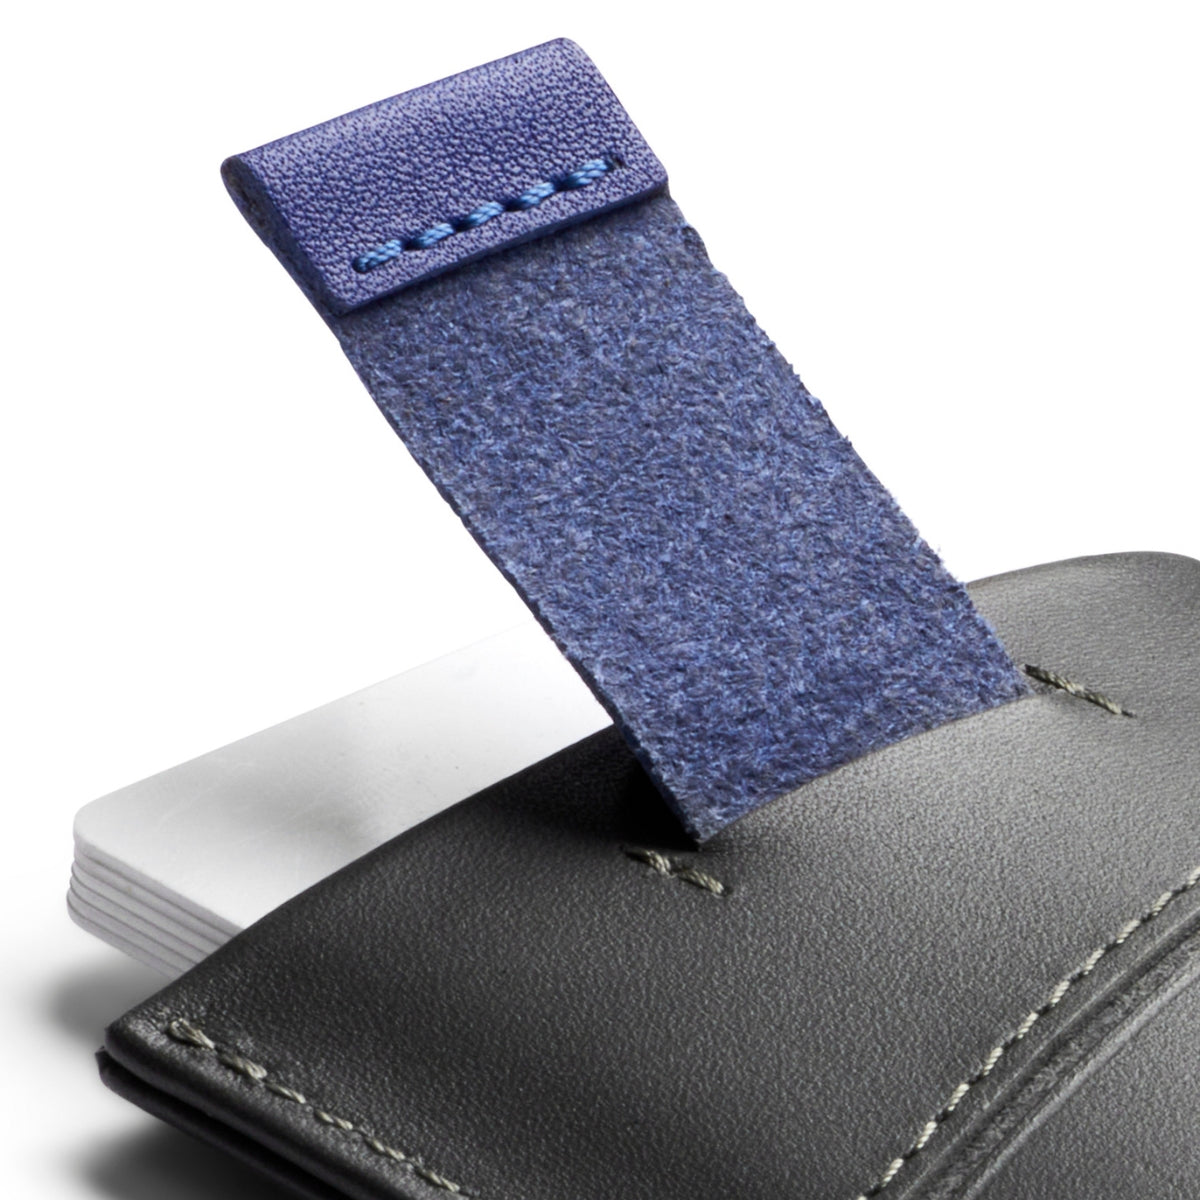 Bellroy Card Sleeve (Second Edition) in Charcoal Cobalt